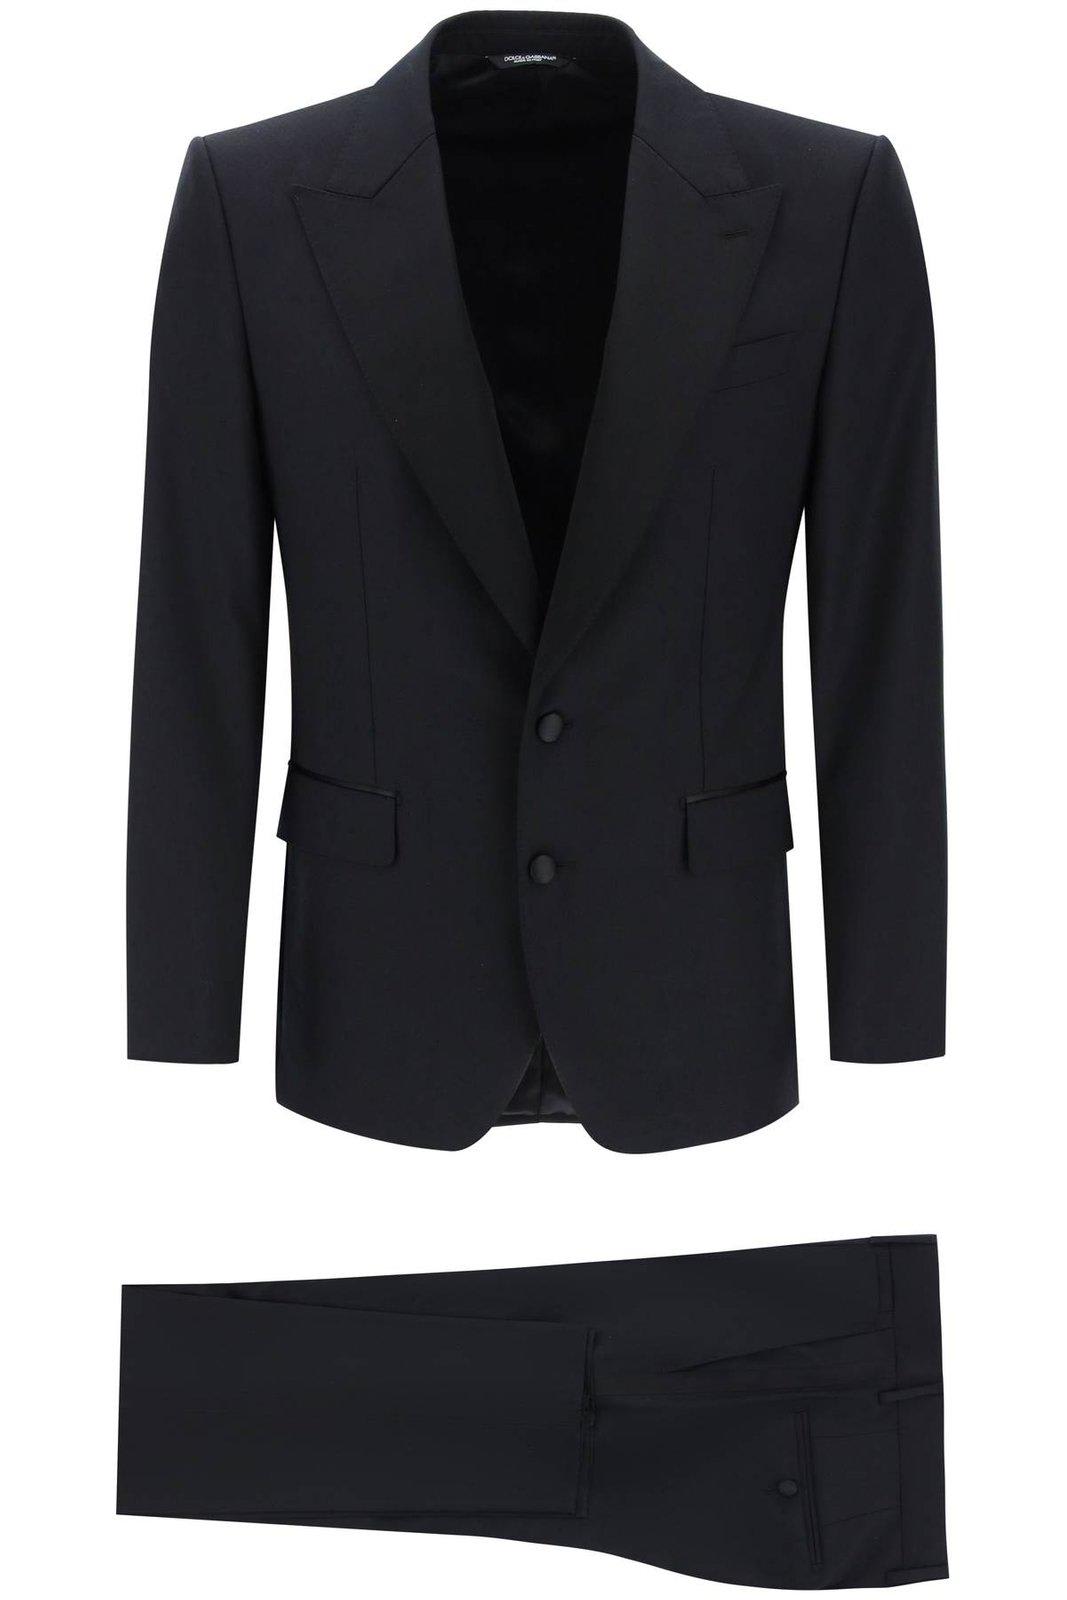 Dolce & Gabbana Single-breasted Pressed Crease Tailored Suit